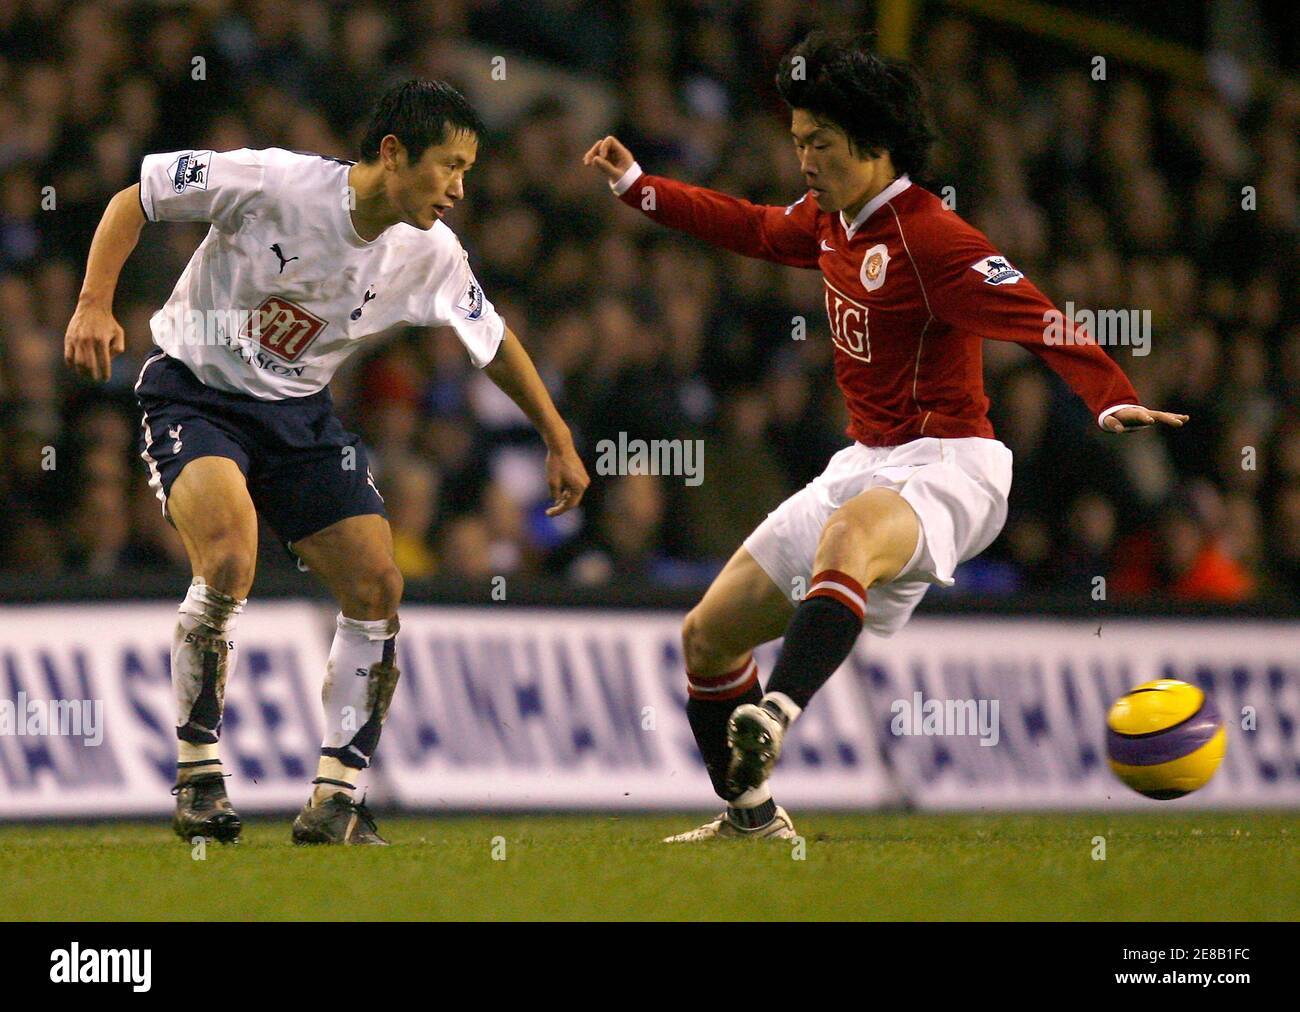 Manchester United's Park Ji-Sung (R) tries to block Tottenham Hotspur's Lee  Young-Pyo during their English Premier League soccer match at White Hart  Lane in London February 4, 2007. NO ONLINE/INTERNET USE WITHOUT